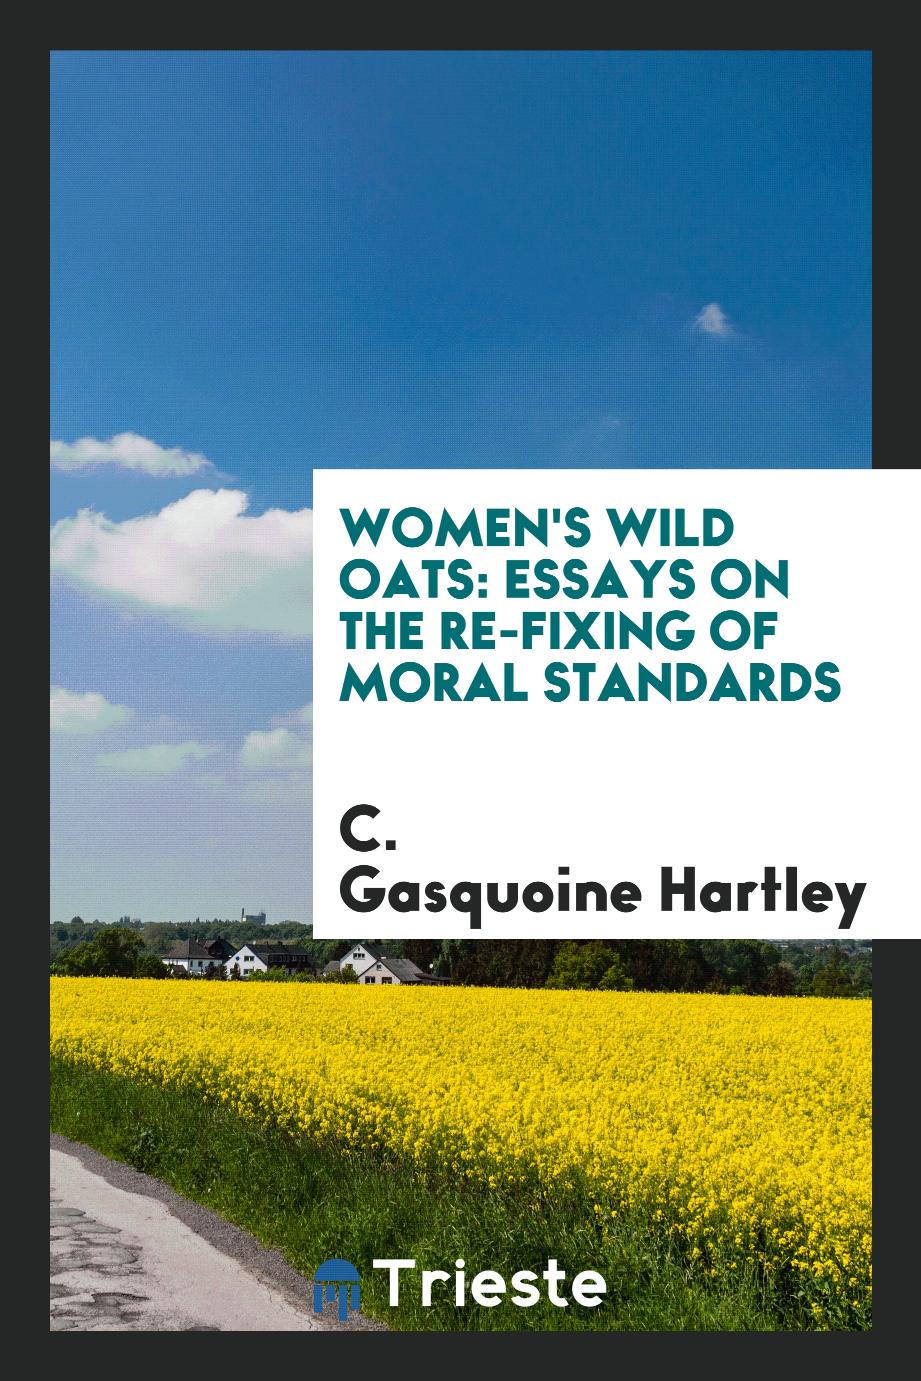 Women's wild oats: essays on the re-fixing of moral standards